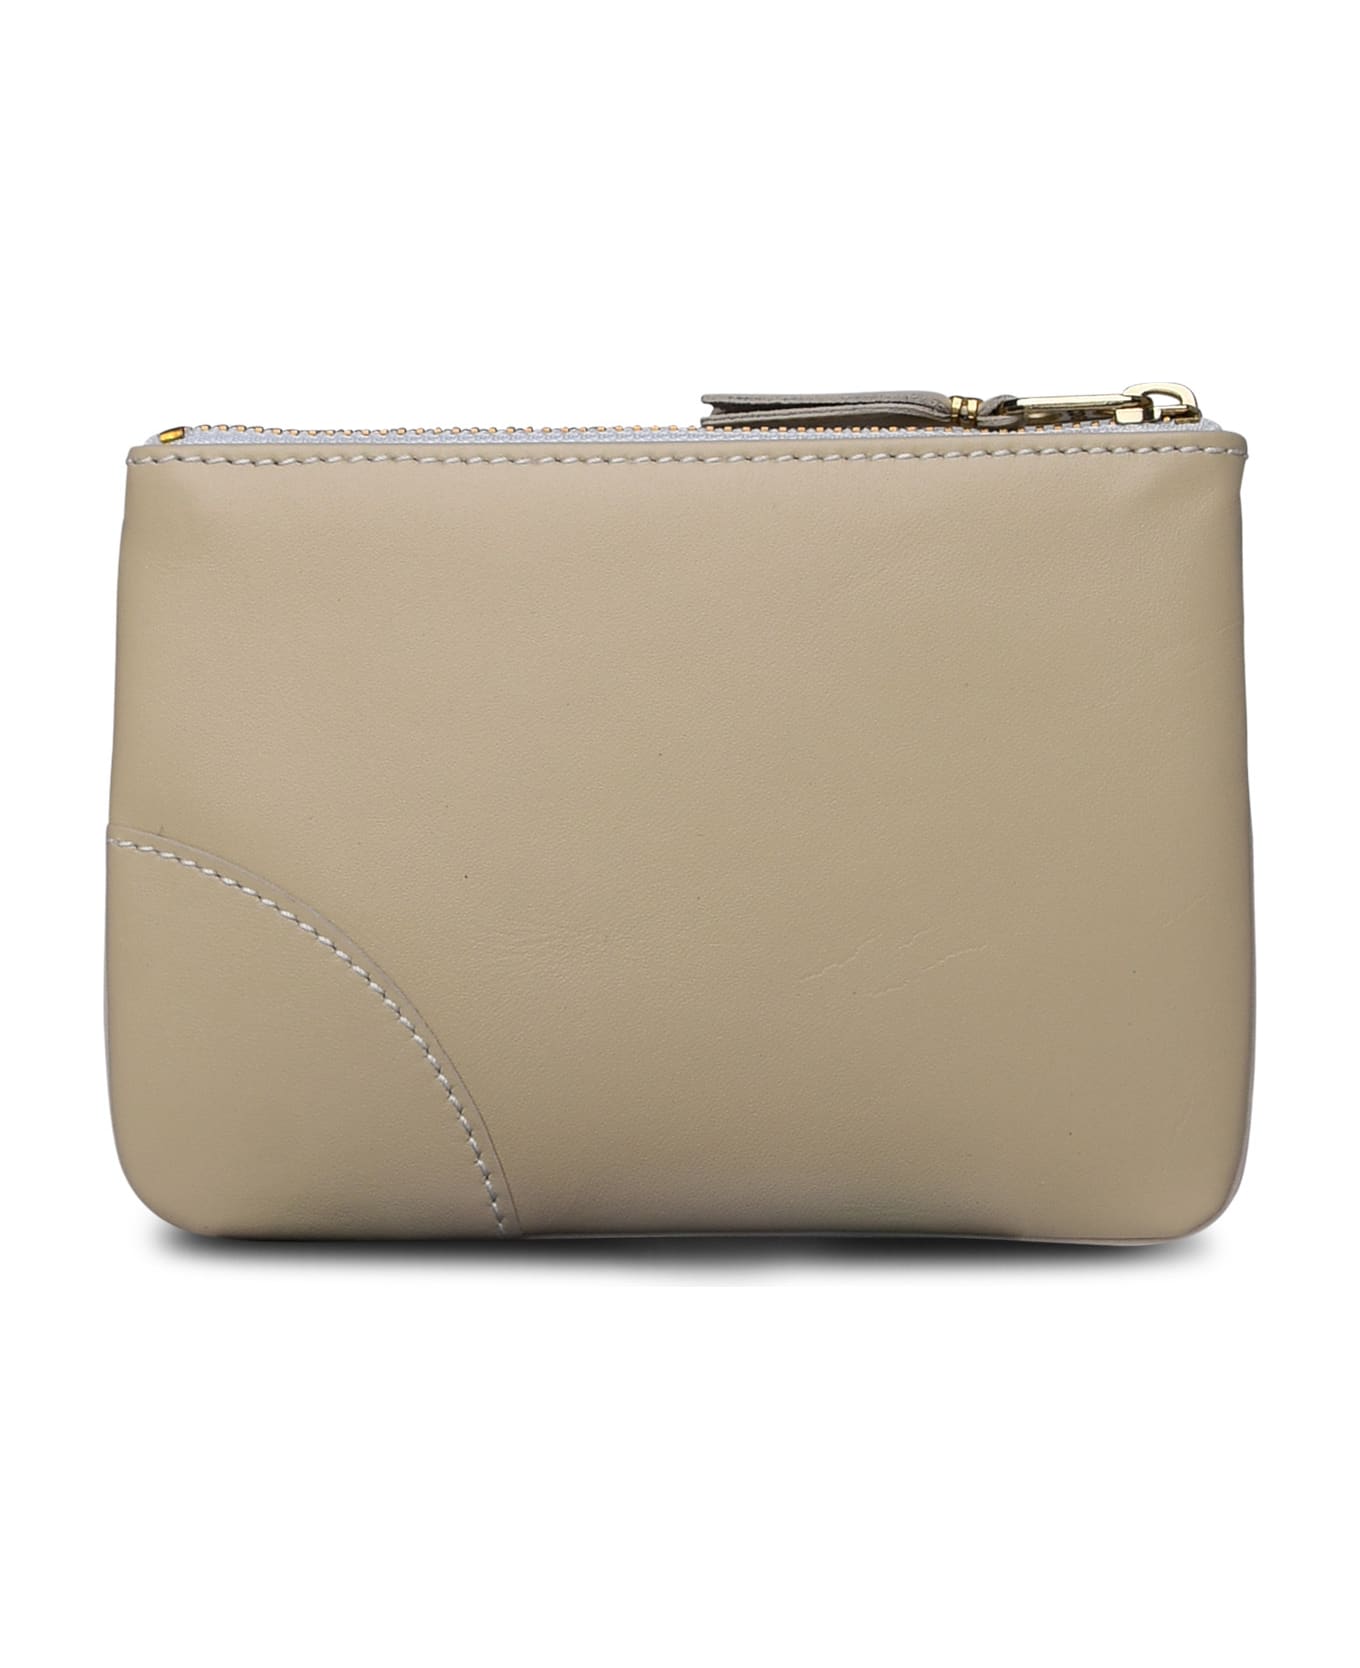 Comme des Garçons Wallet Small Leather the Bag - Ivory